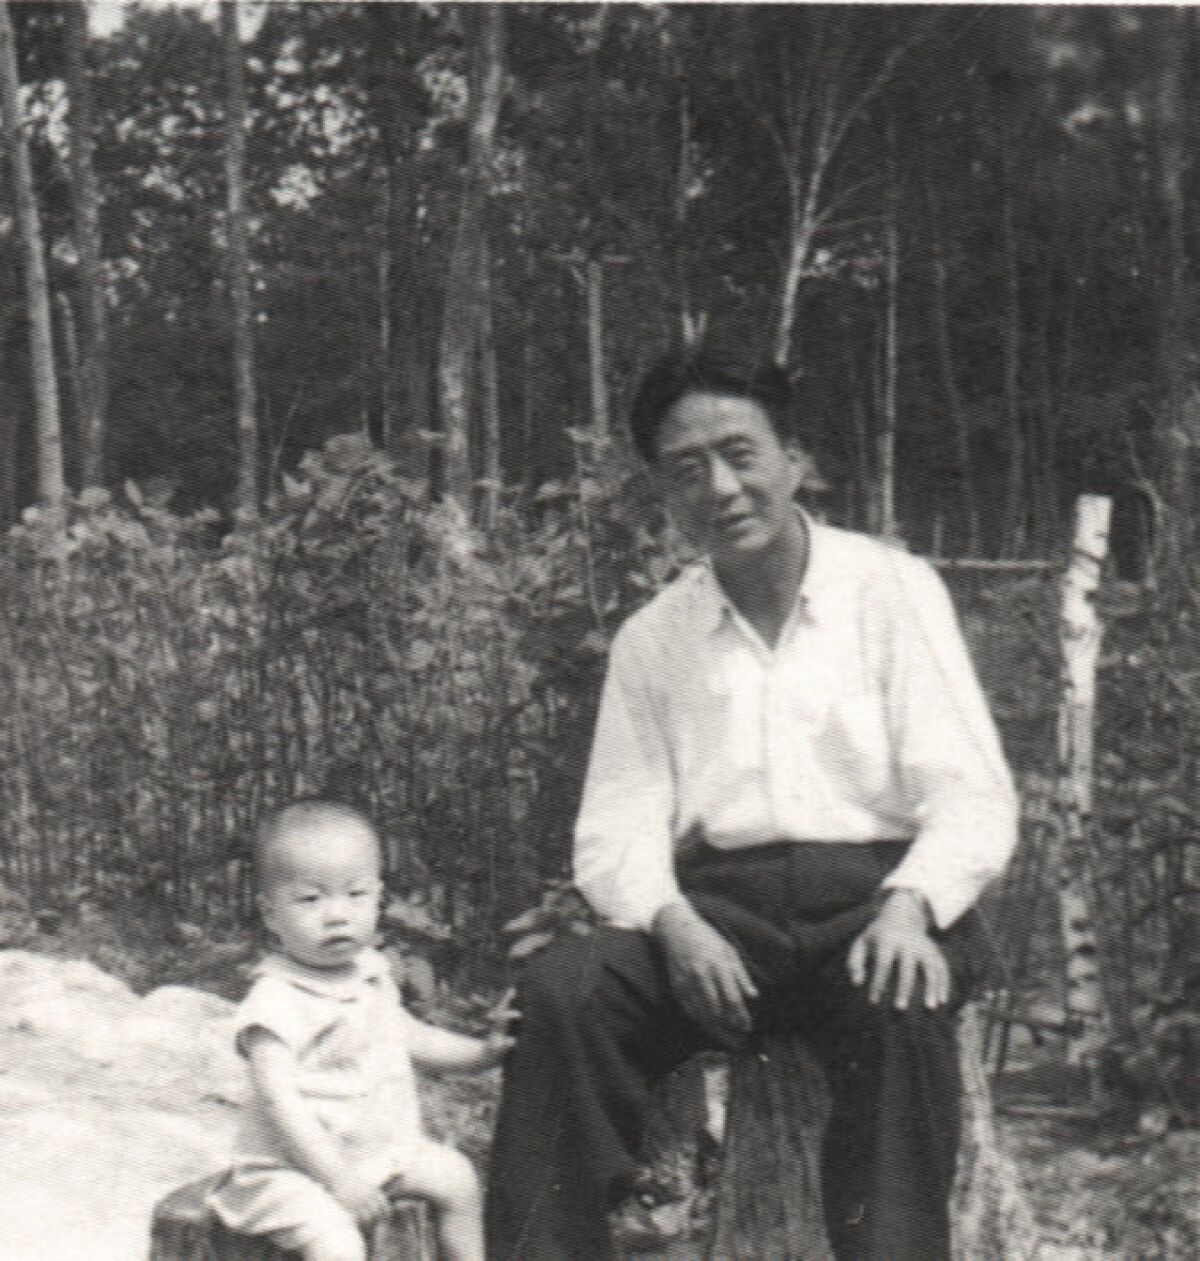 Ai Weiwei and his father, Ai Qing, pictured at Farm 852 labor camp, Heilongjiang, China, in 1958.